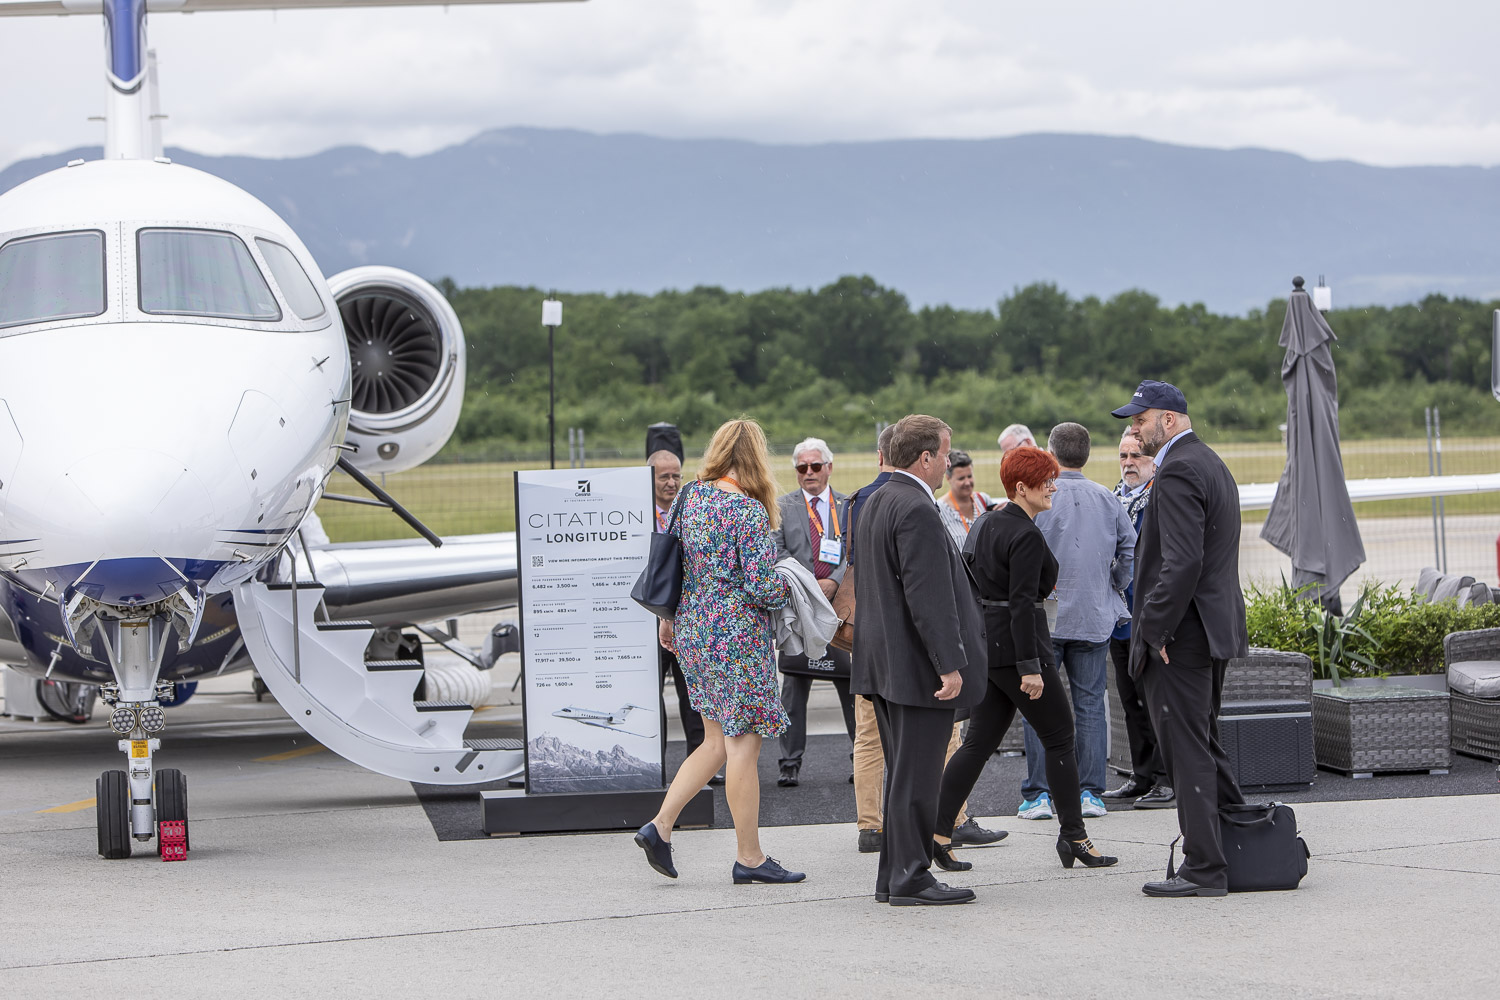 Attendees network and explore aircraft at the EBACE2022 display.